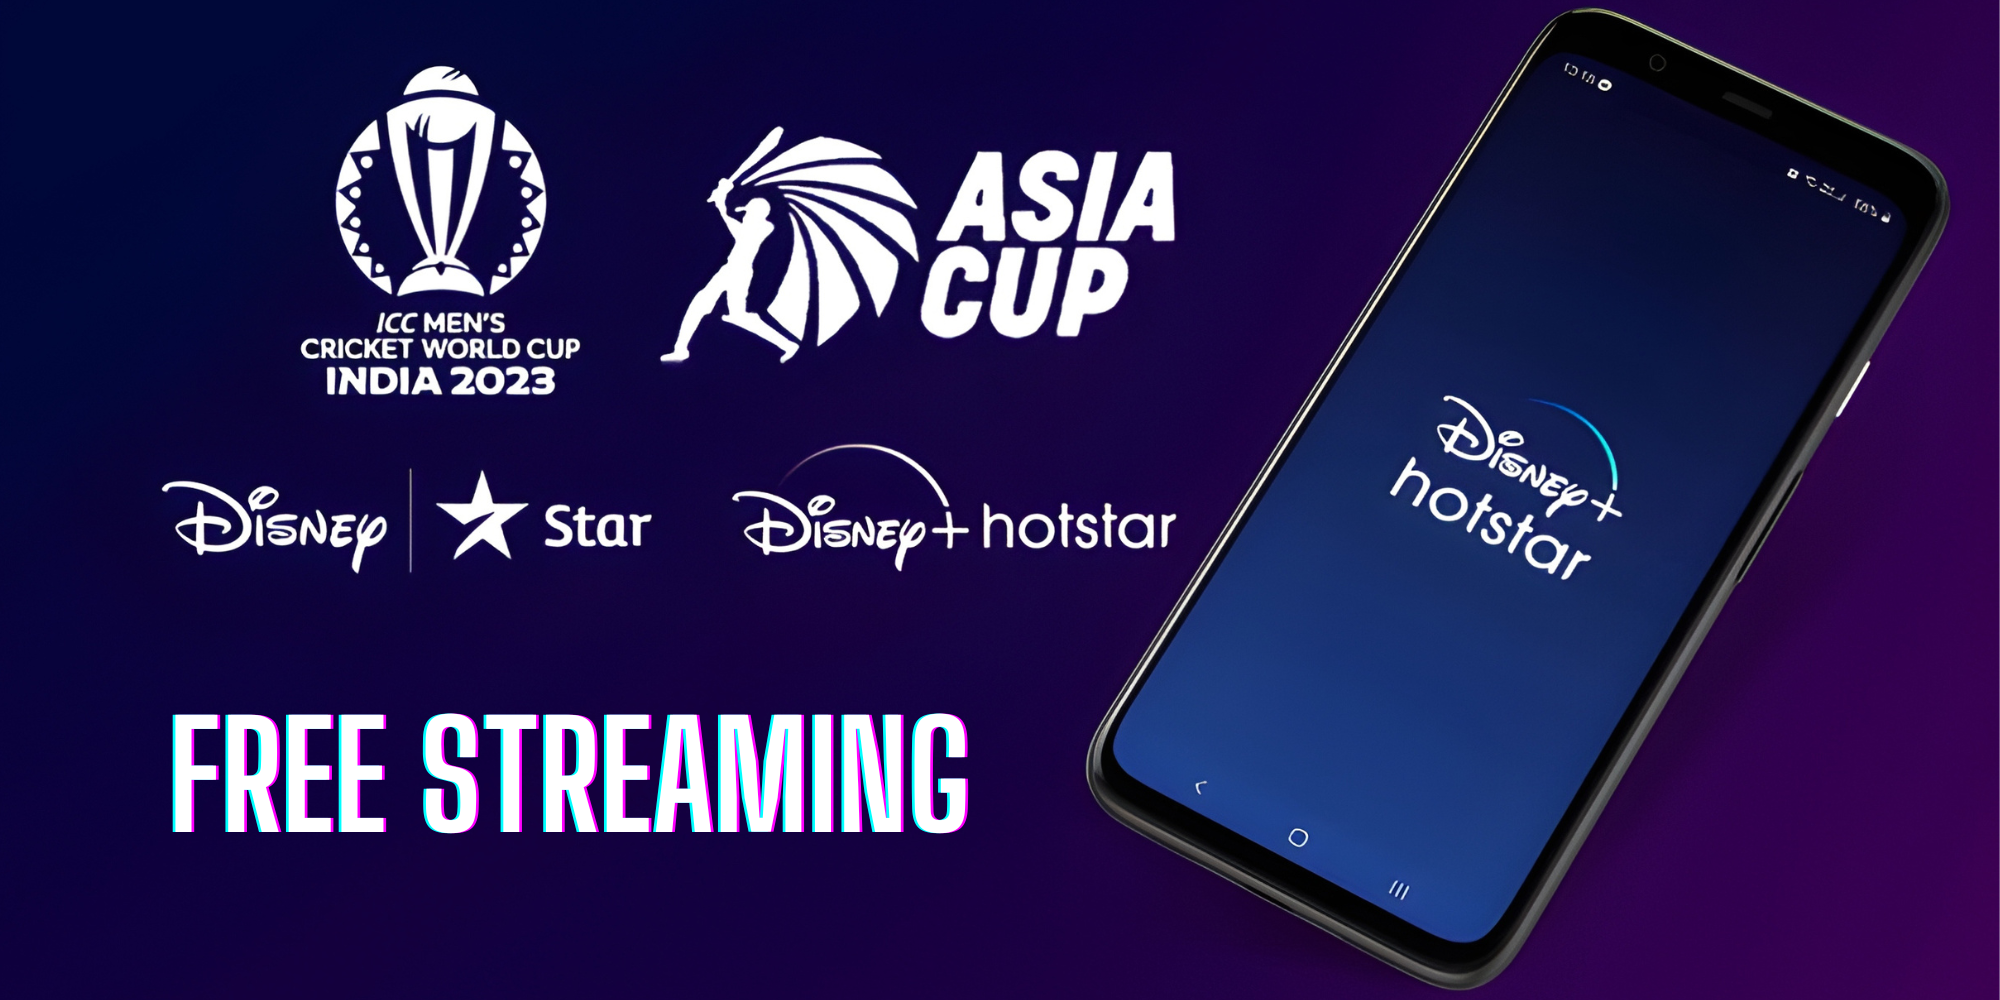 YourStory cricket streaming